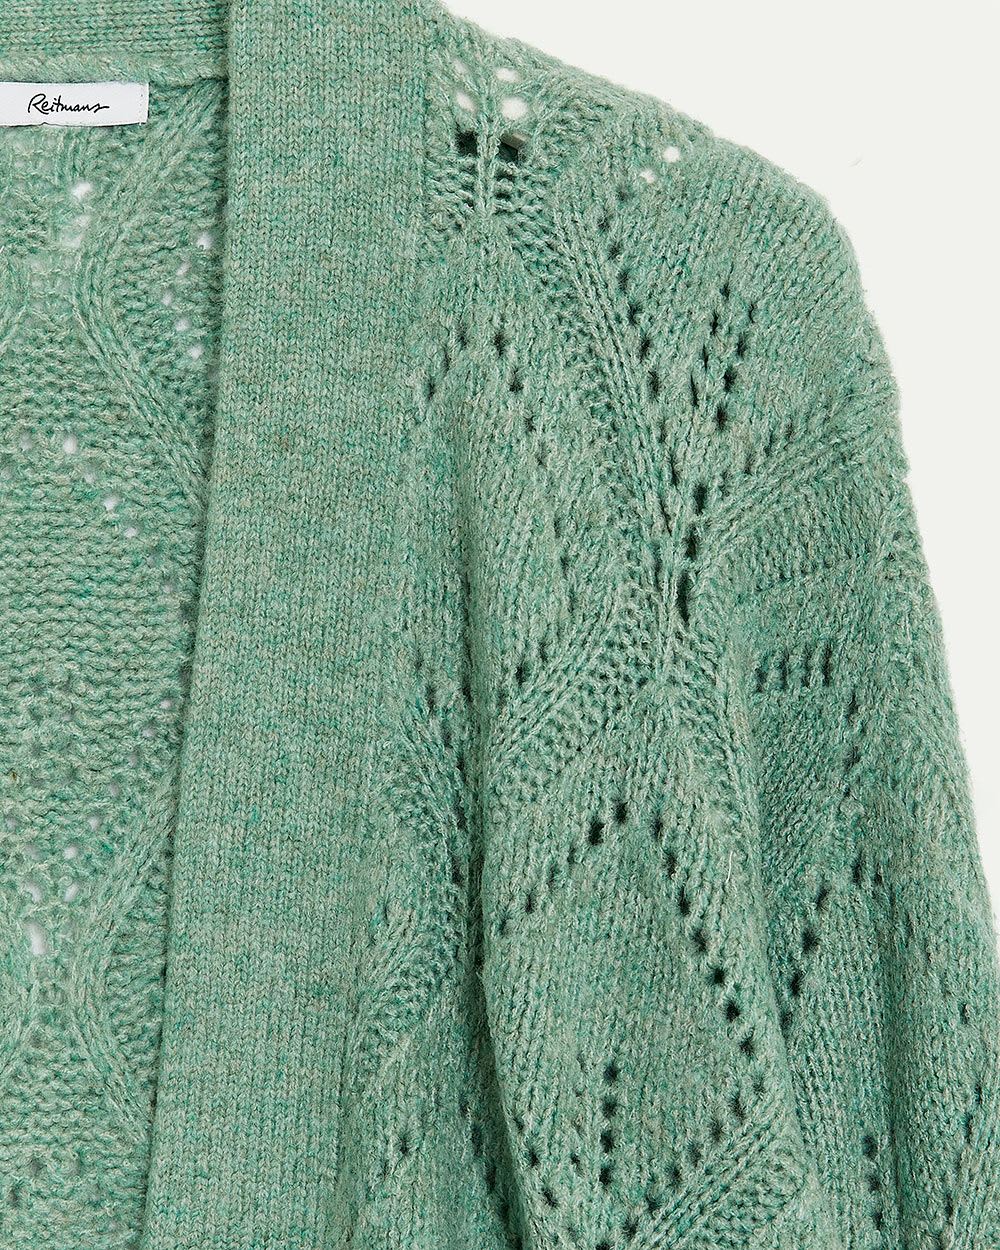 Open Cardigan with Pointelle Stitches